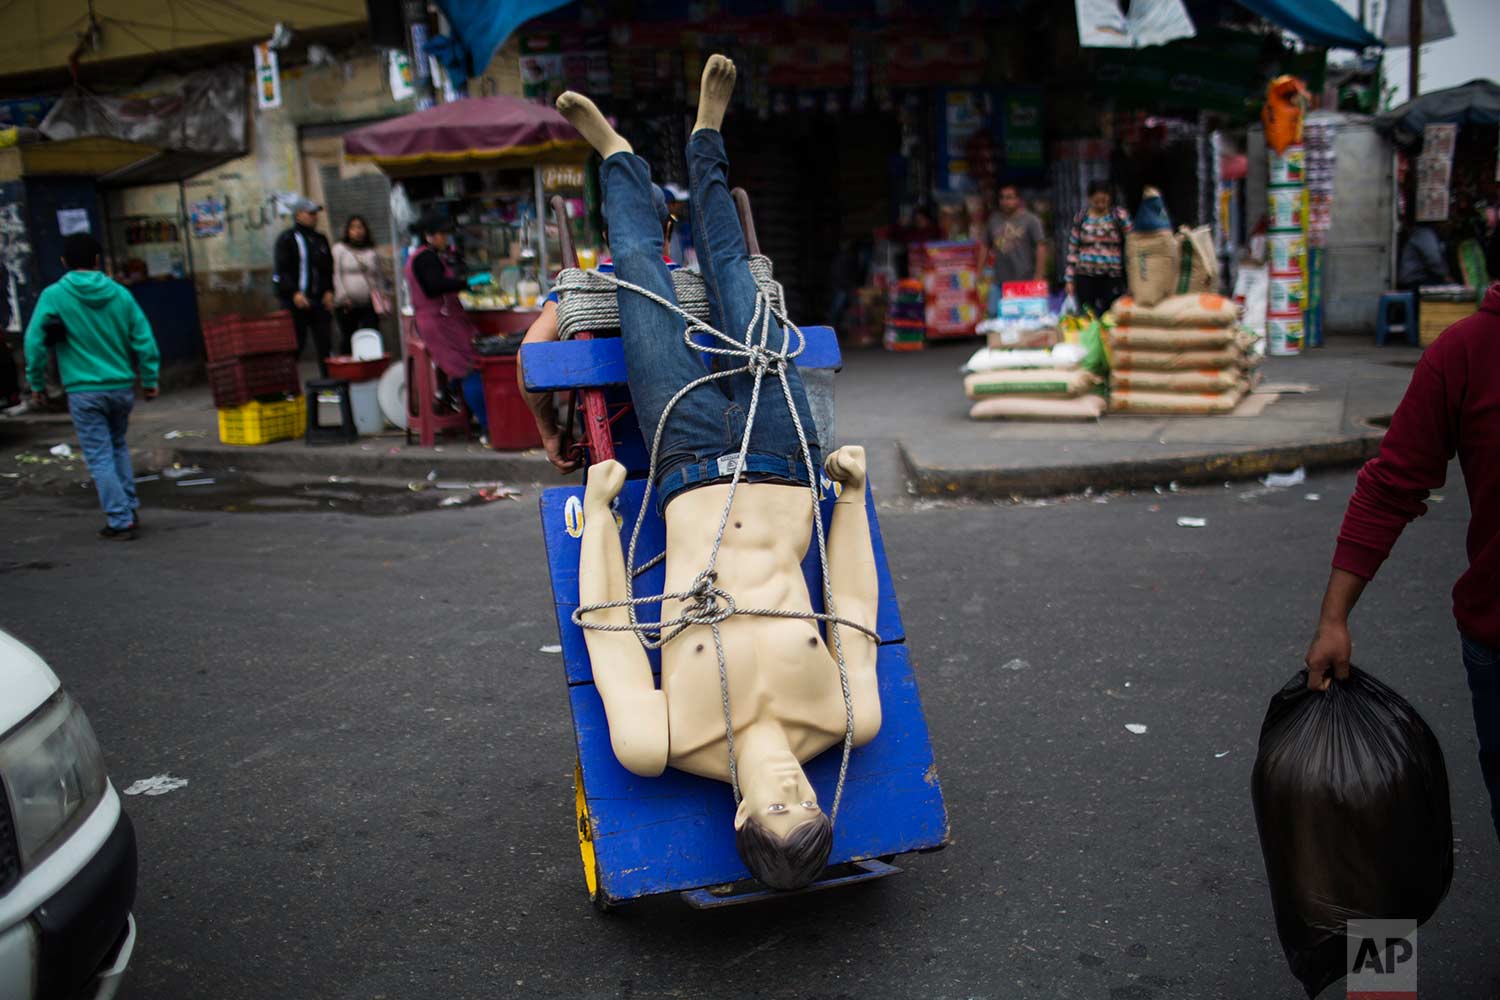  A loader or "cargador" carries a mannequin on his dolly at the Gamarra market, one of Latin America's largest and busiest textile markets, in Lima, Peru, Monday, Aug. 14, 2017. (AP Photo/Rodrigo Abd) 